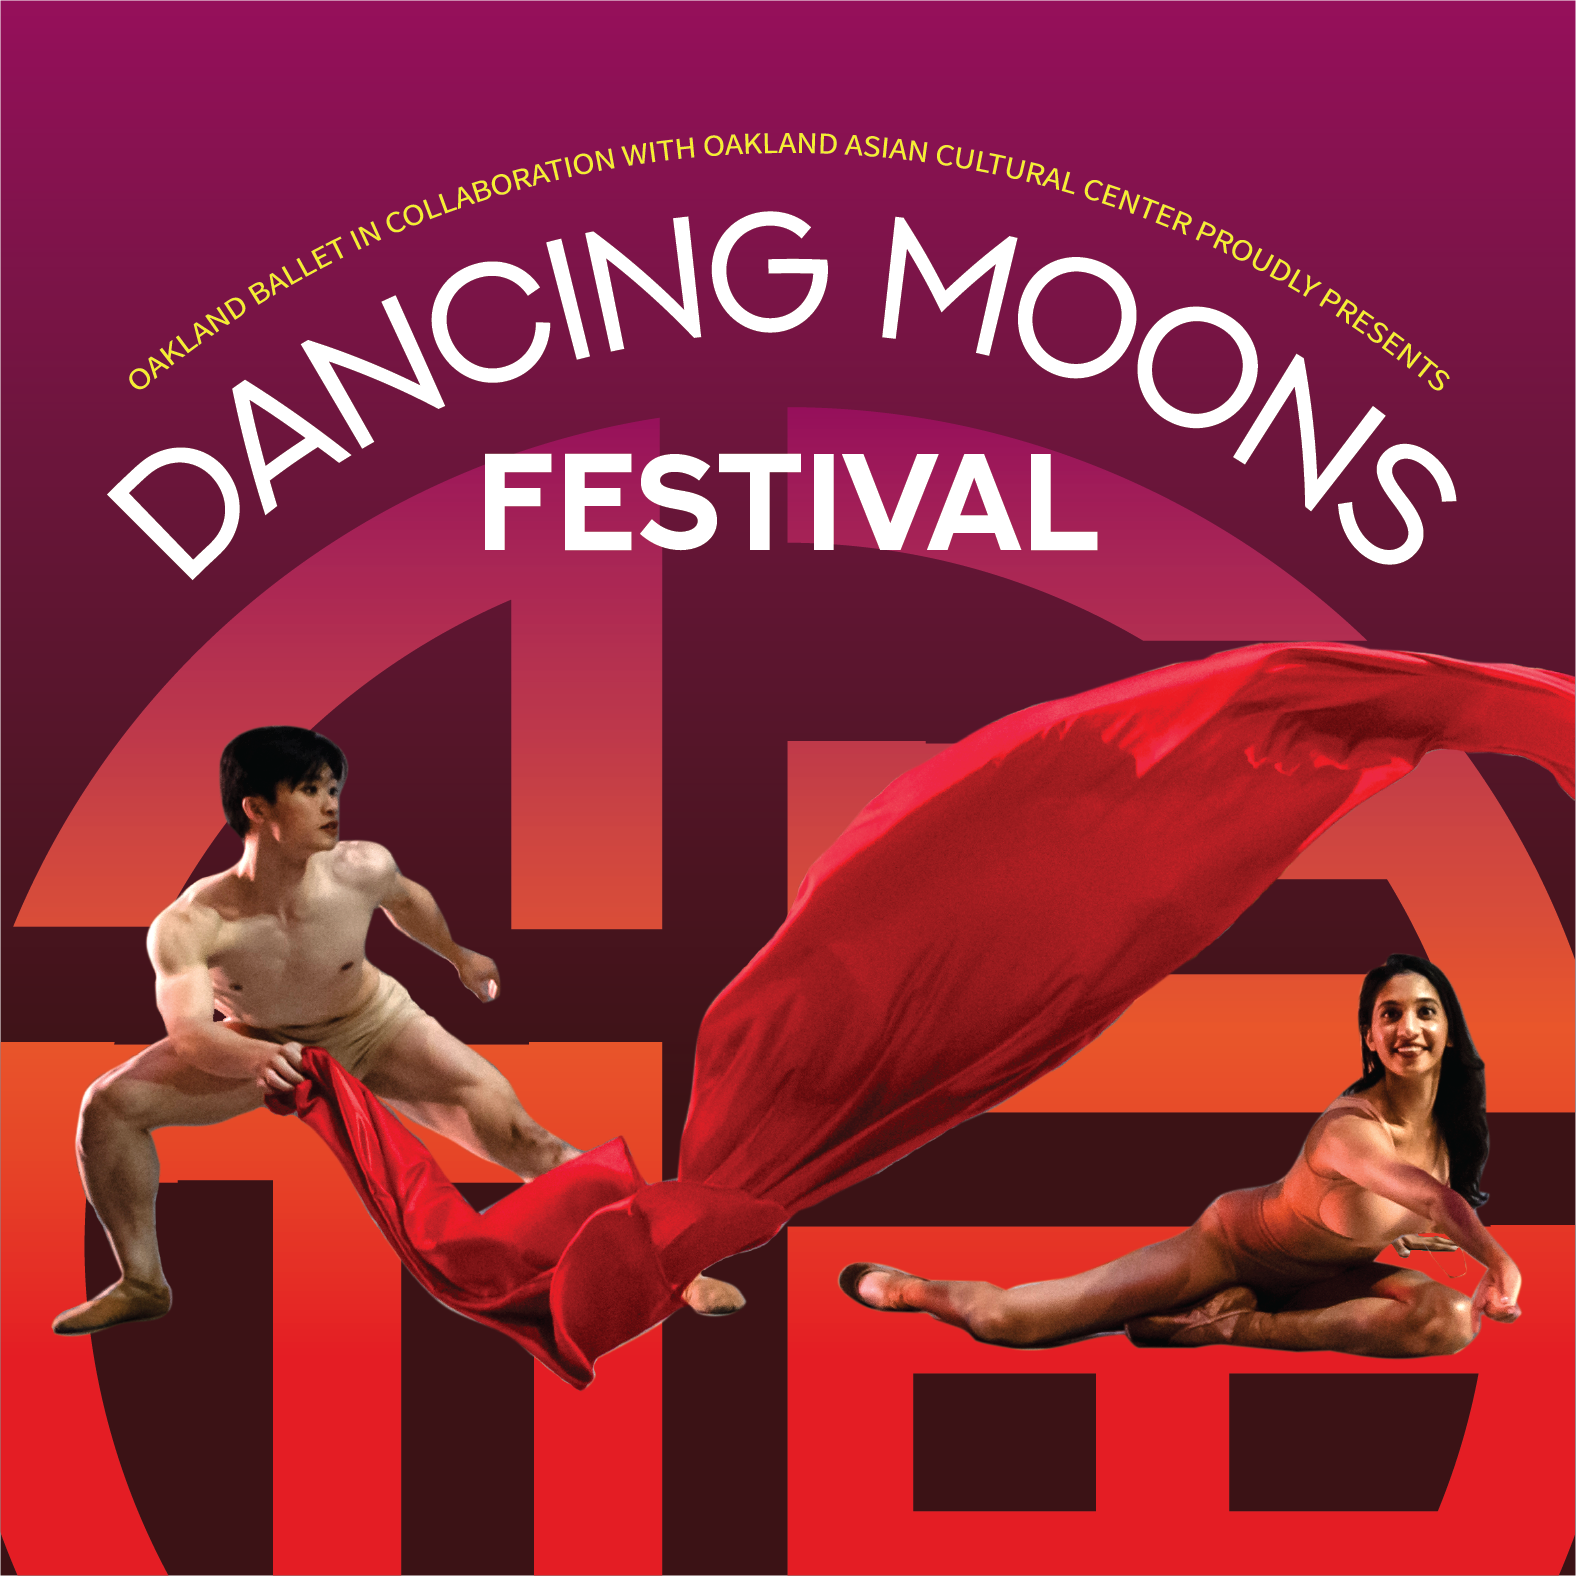 Dancing Moons Festival written in curved letters above 2 dancers posing with a red cloth